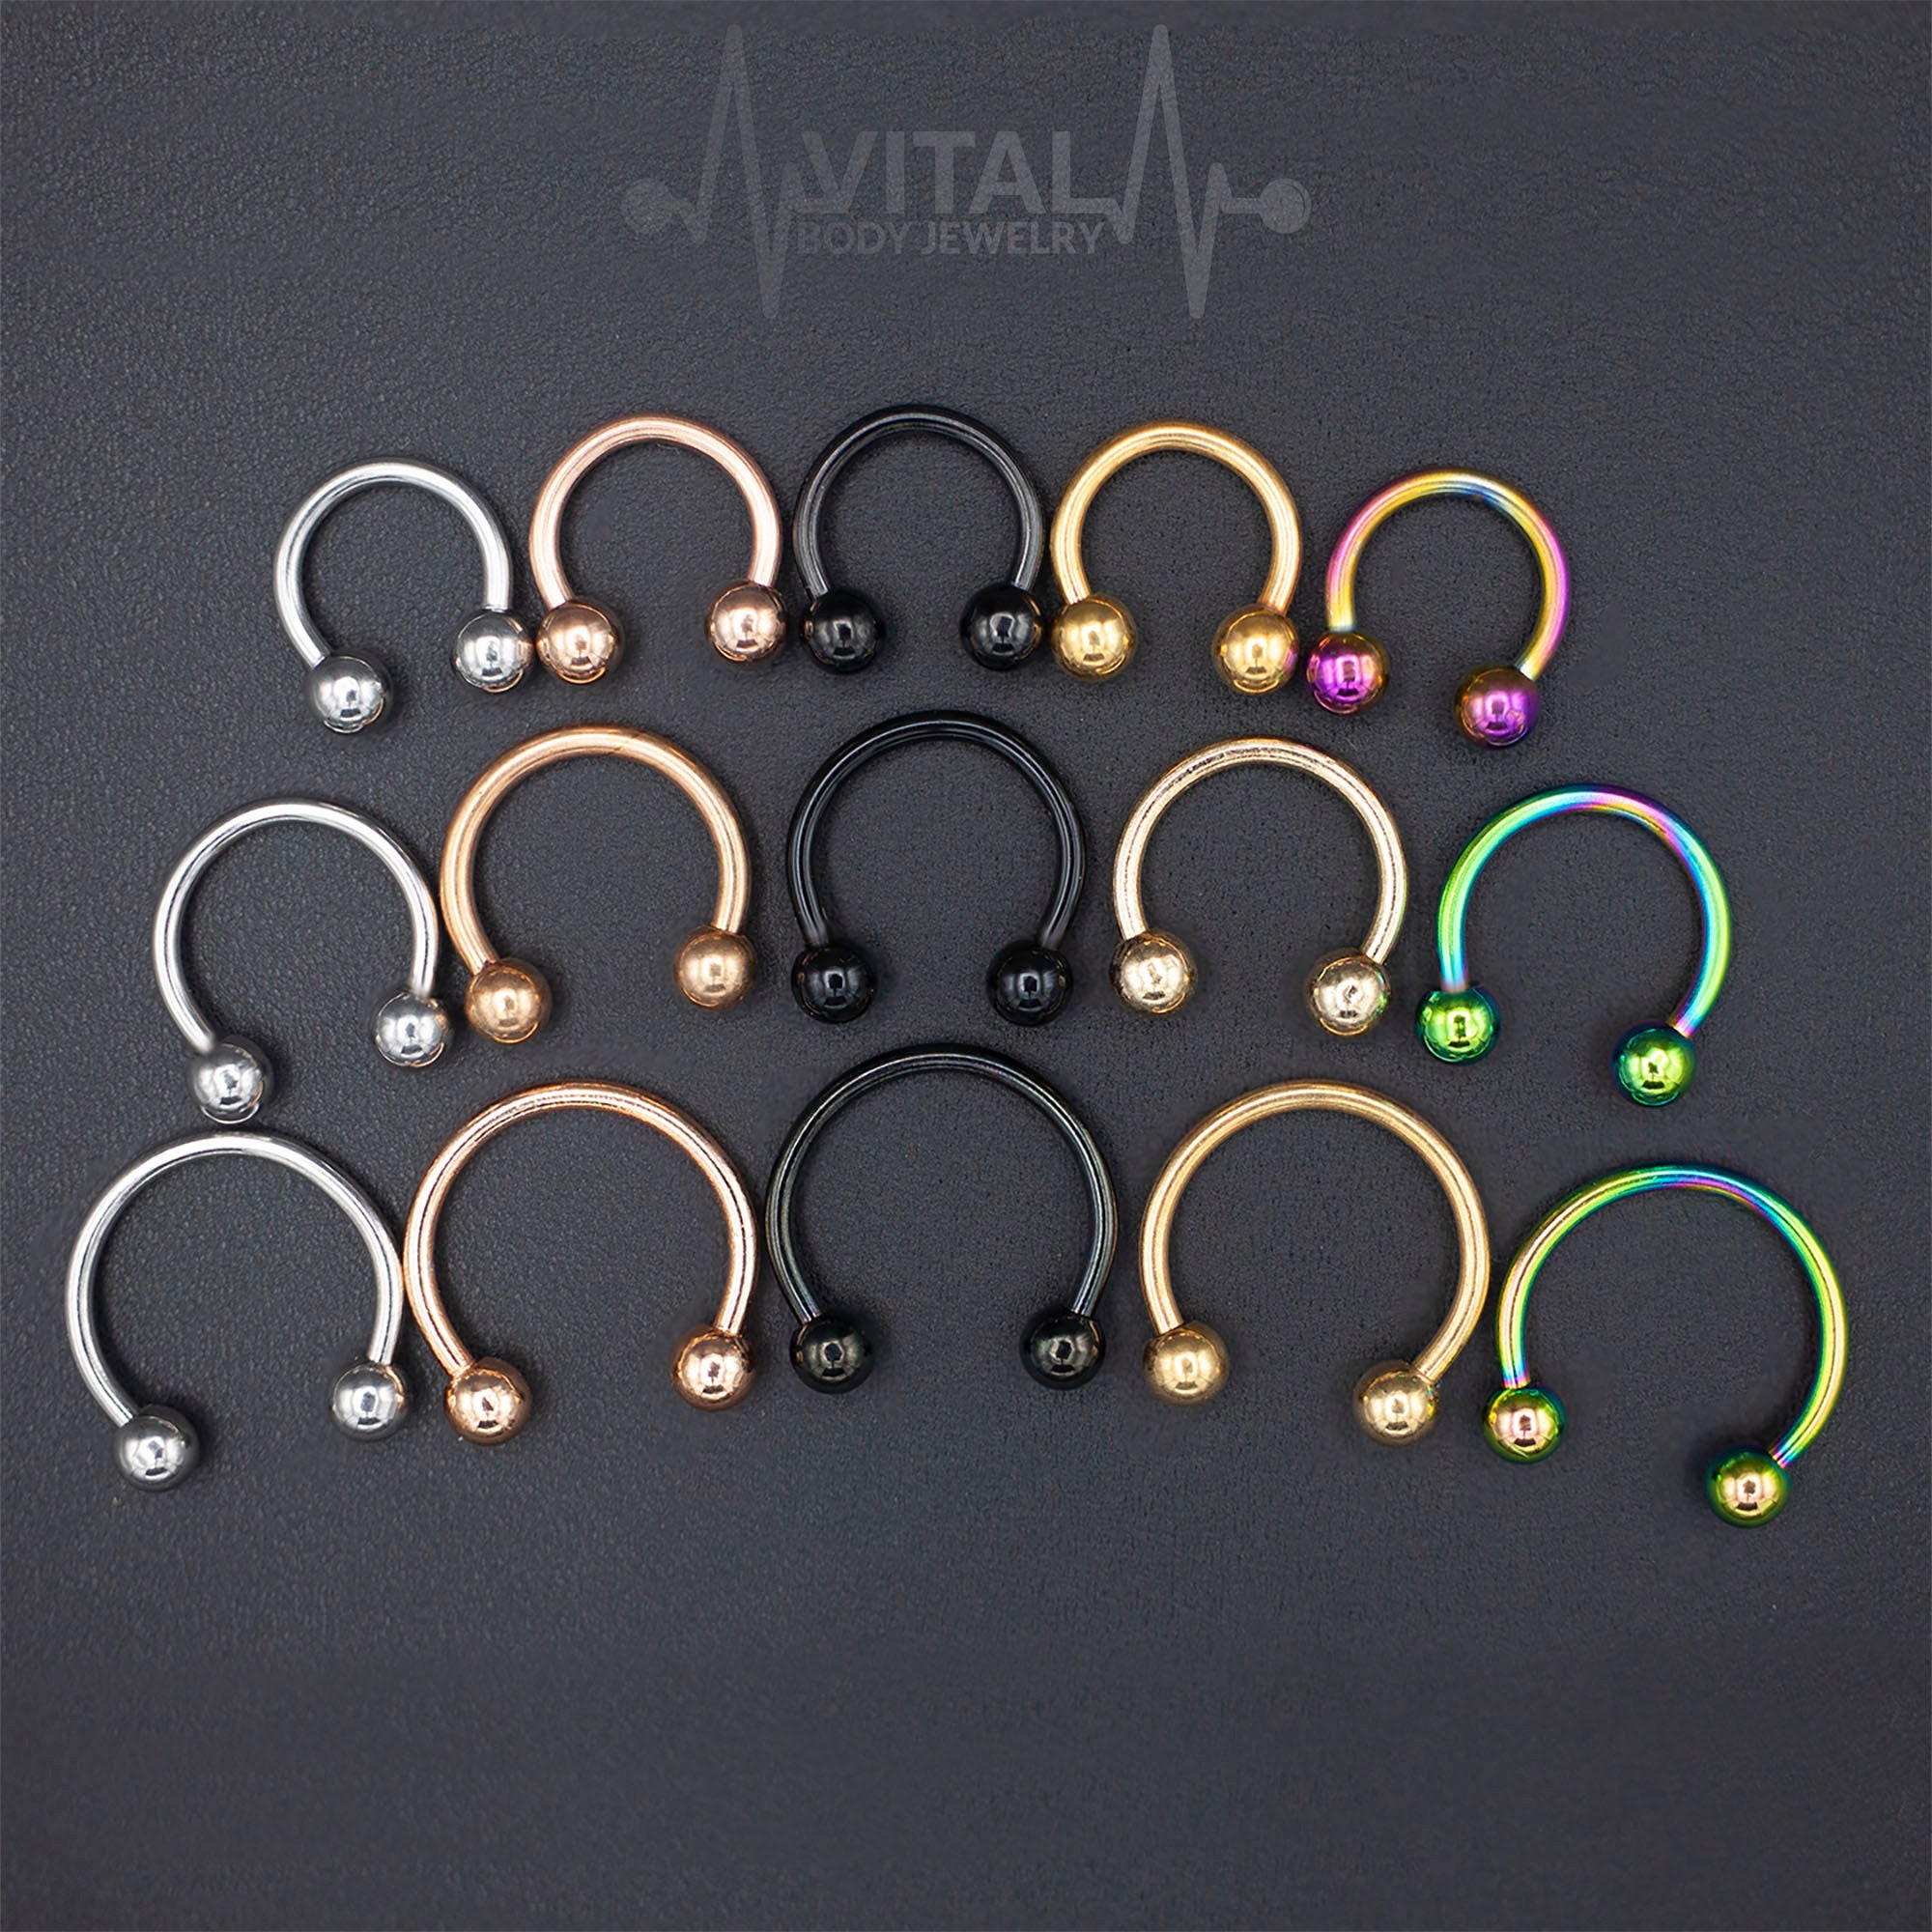 Covet Jewelry PVD Plated Over 316L Surgical Stainless Steel Horseshoe with Multi Gemmed Balls